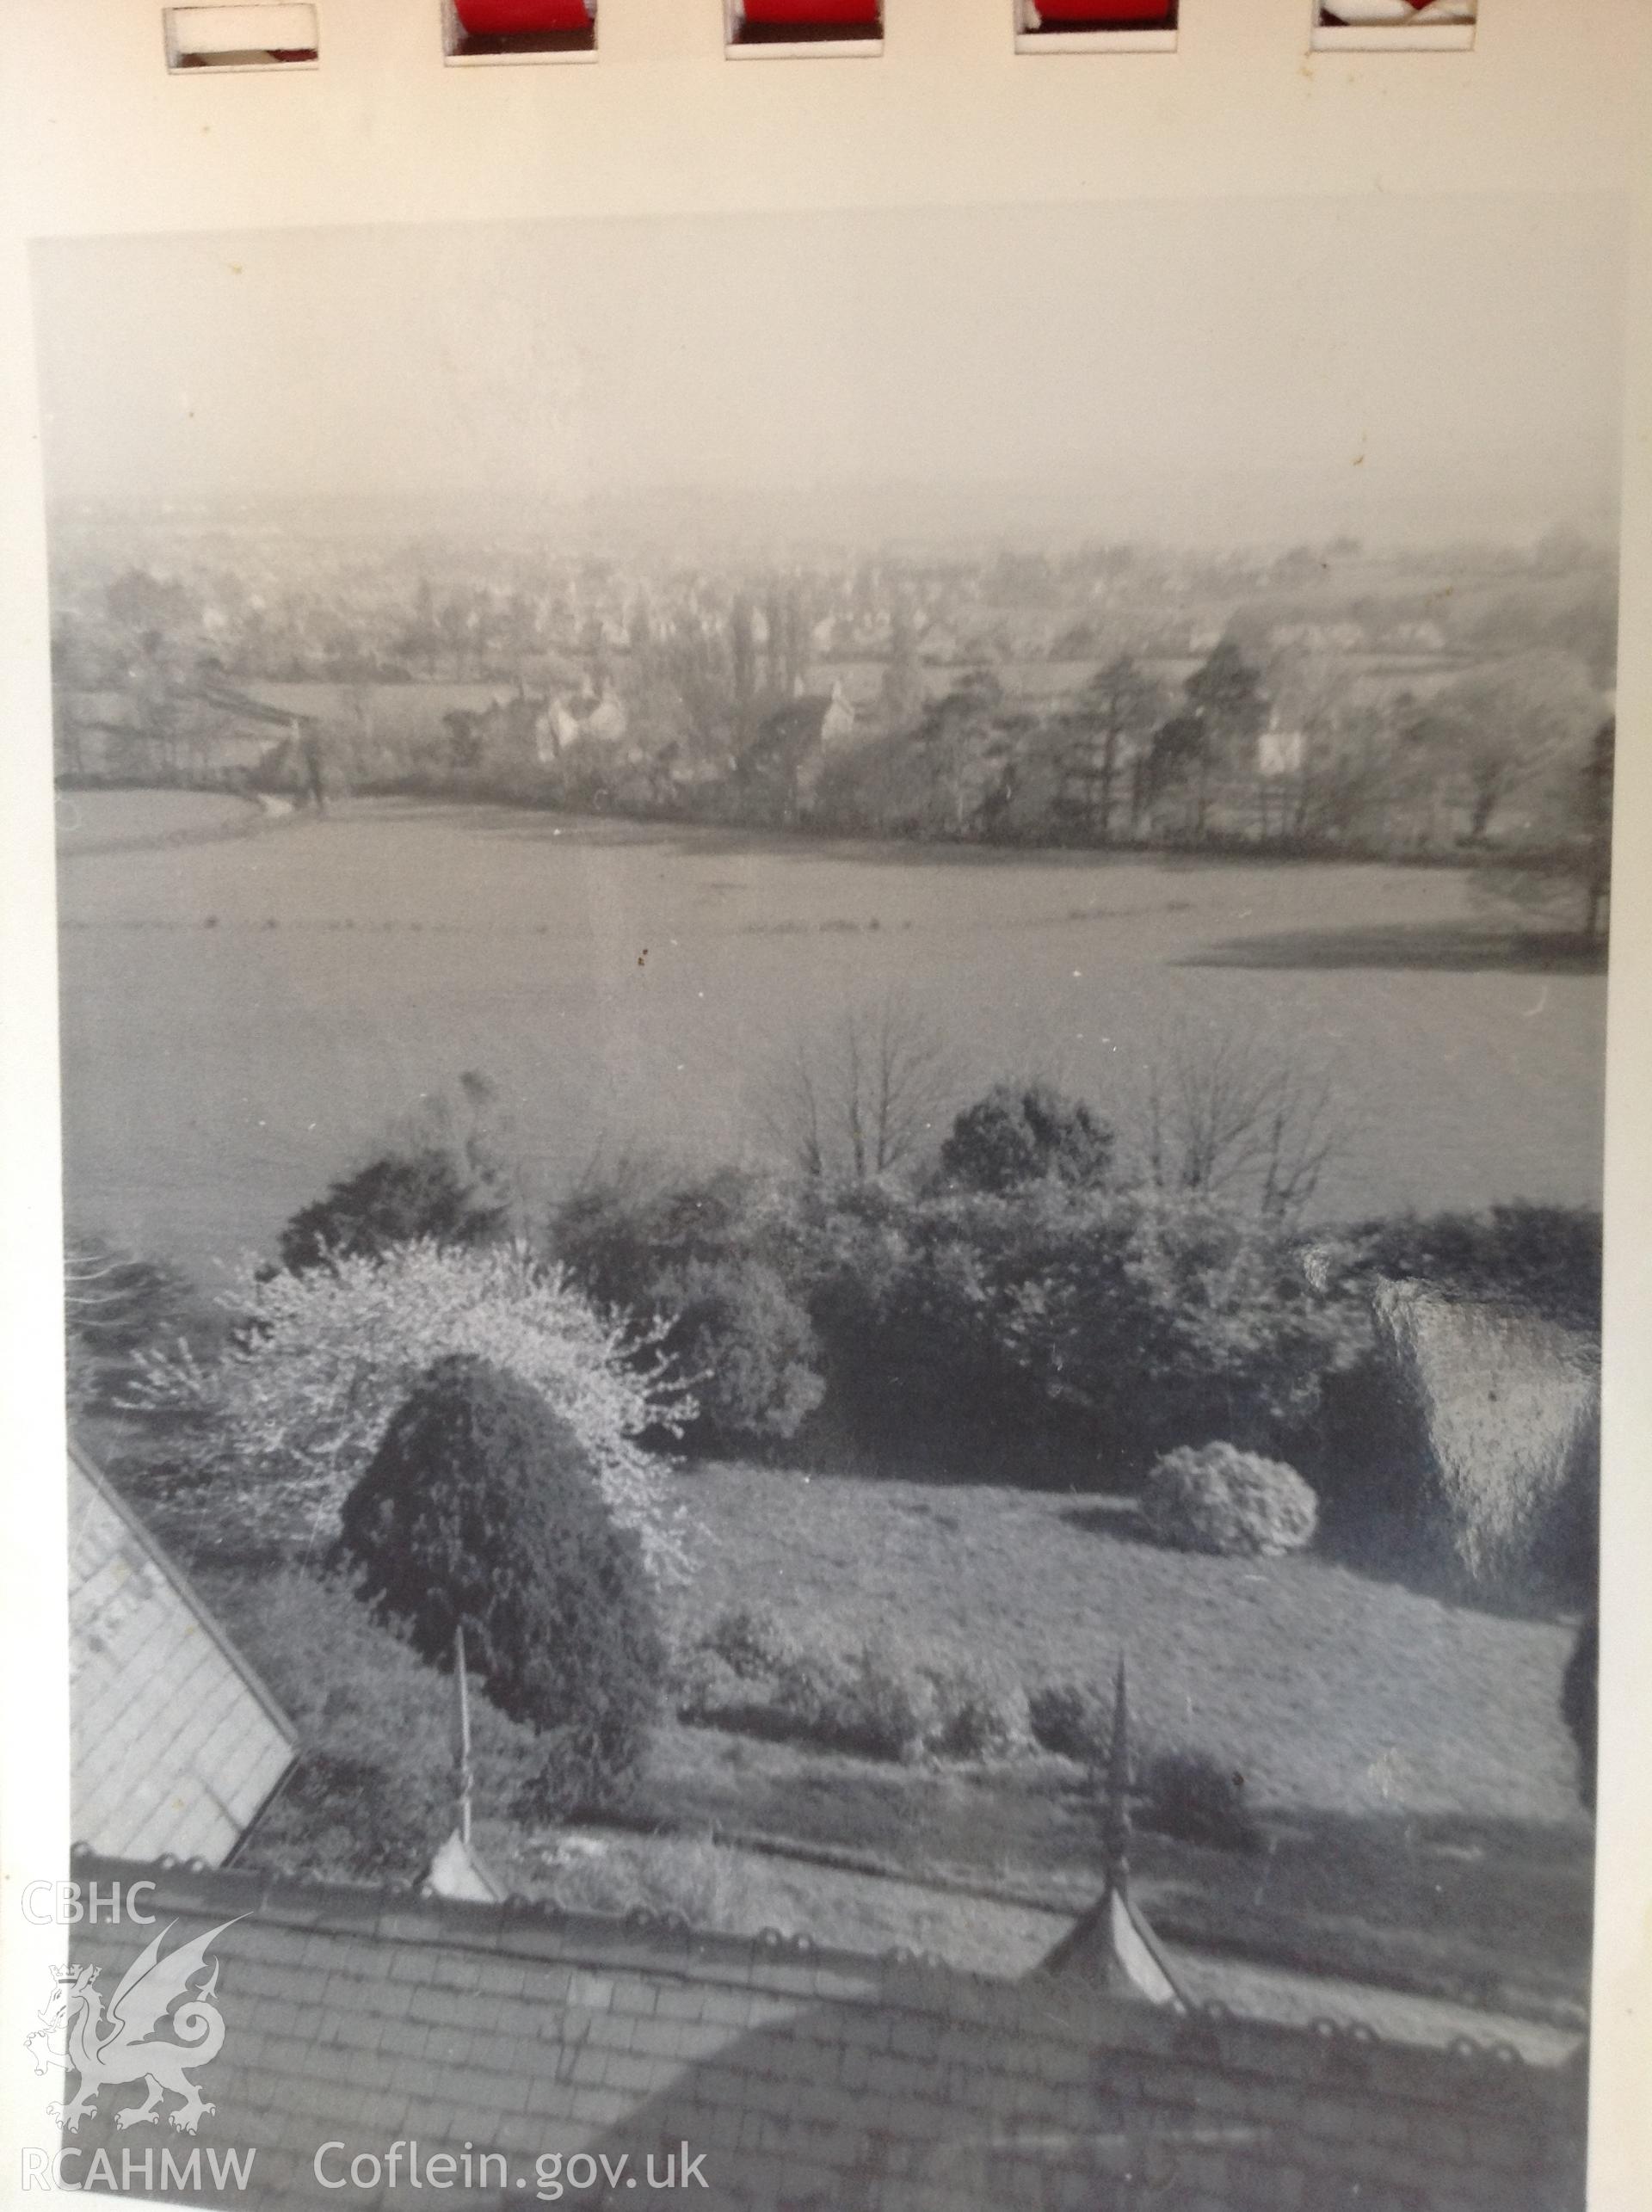 Photograph showing view from Bryngwenallt Tower. Digital copy donated by Gillian Swan in January 2022.